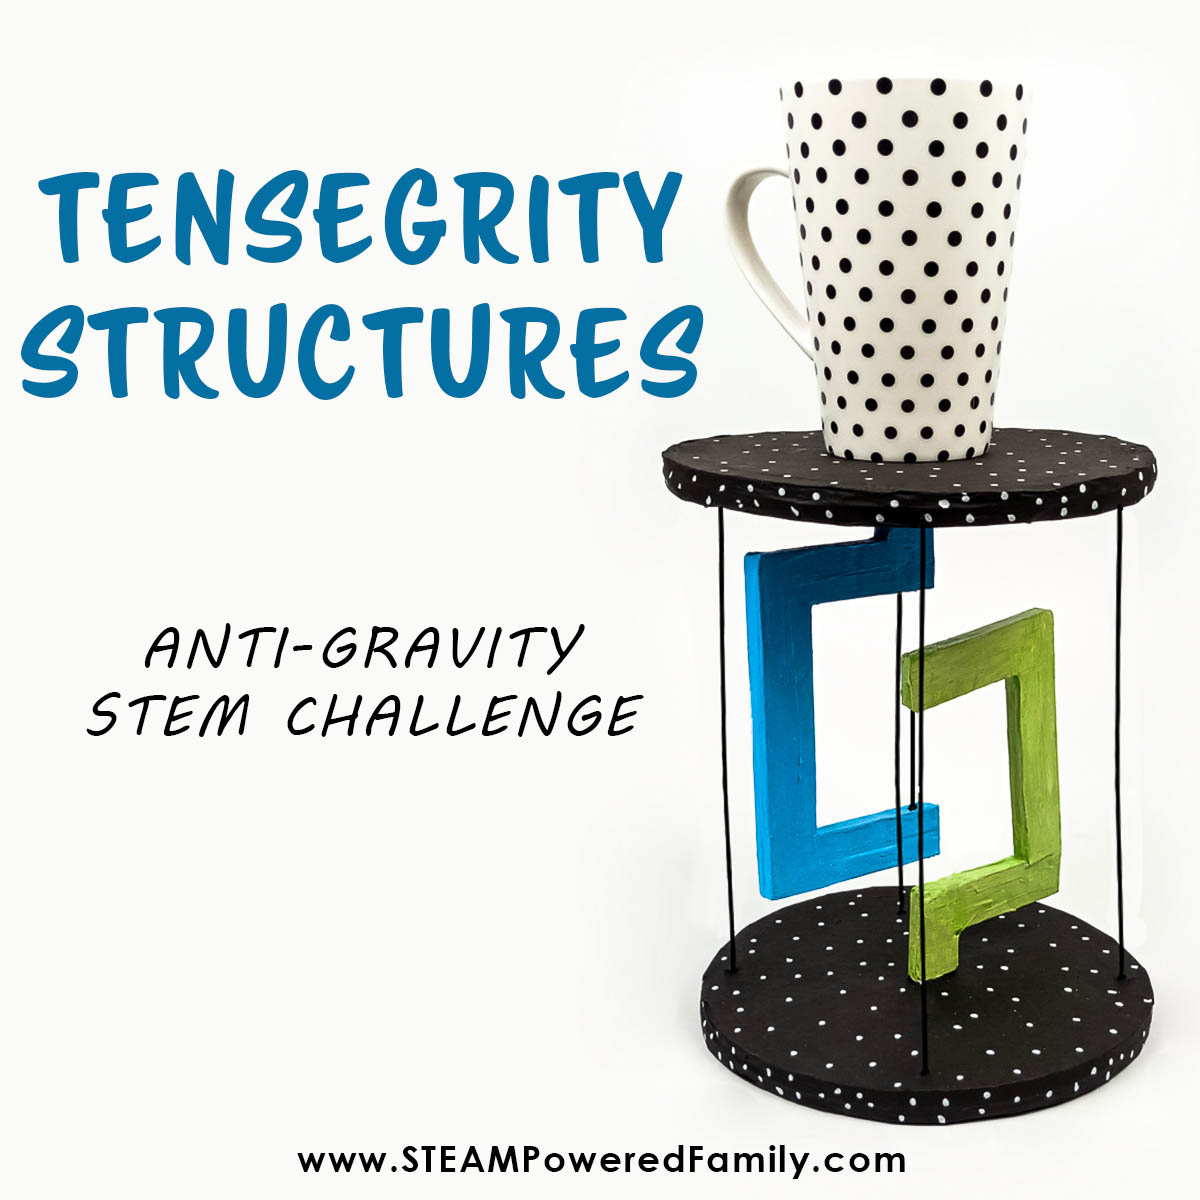 How to Build Tensegrity Structures STEM Project